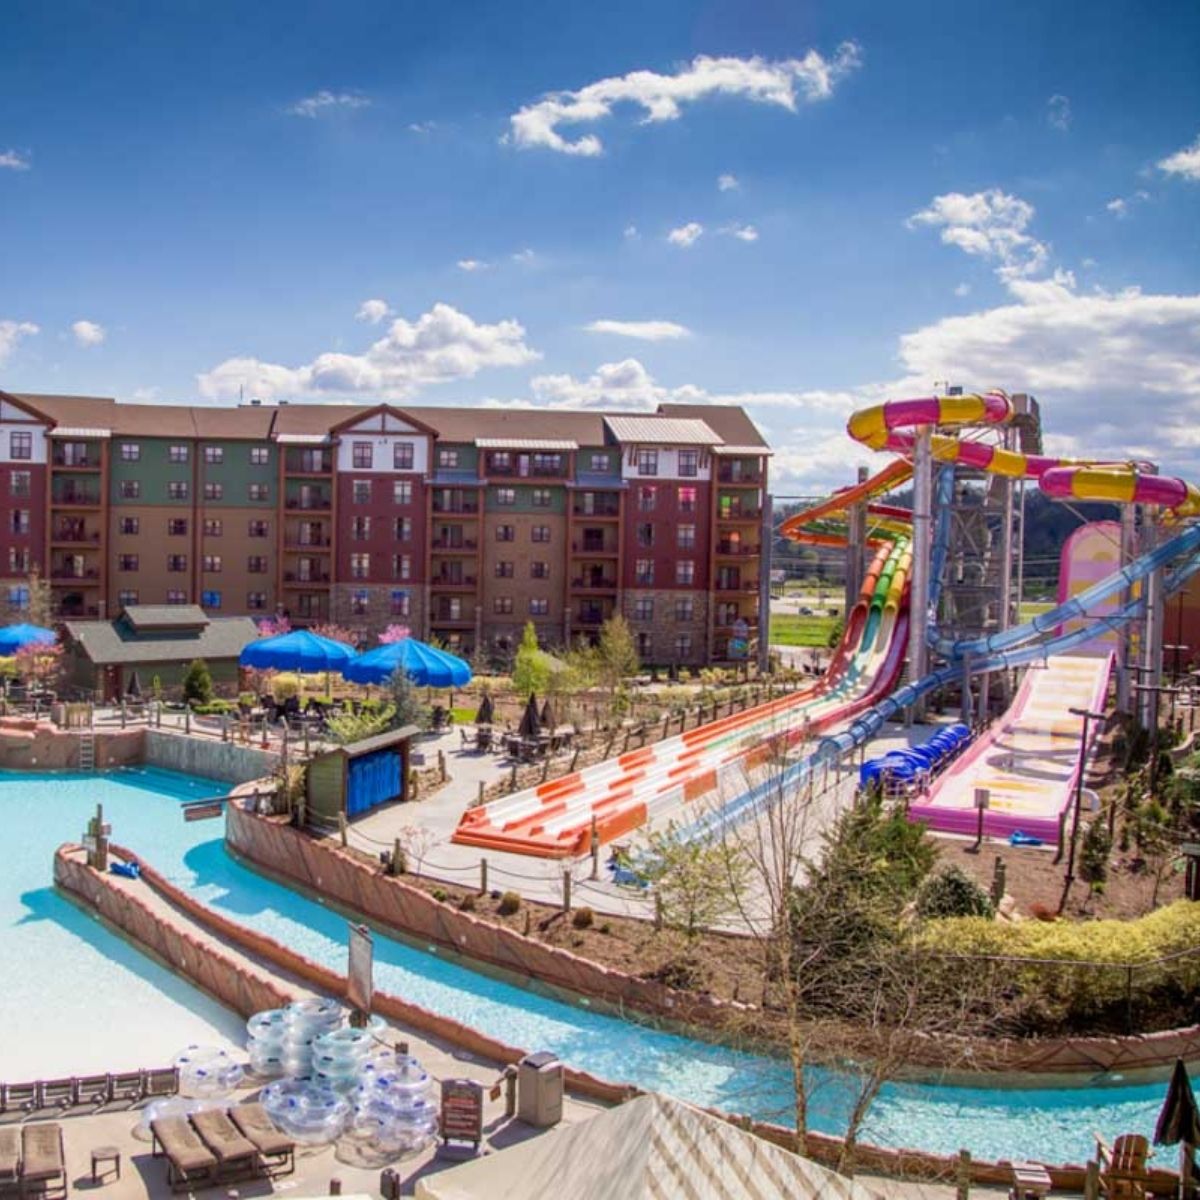 The waterpark at the Wilderness at the Smokies Resort.